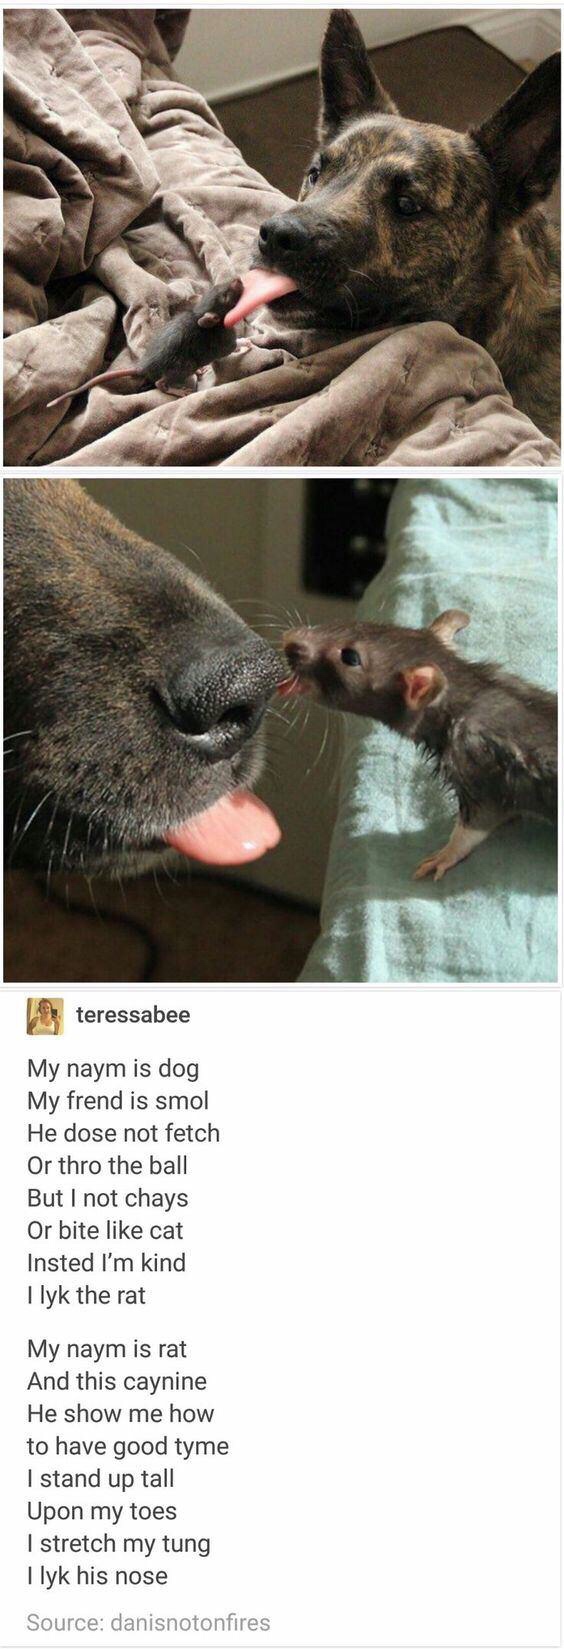 meme dog rat poem - teressabee My naym is dog My frend is smol He dose not fetch Or thro the ball But I not chays Or bite cat Insted I'm kind I lyk the rat My naym is rat And this caynine He show me how to have good tyme I stand up tall Upon my toes I str